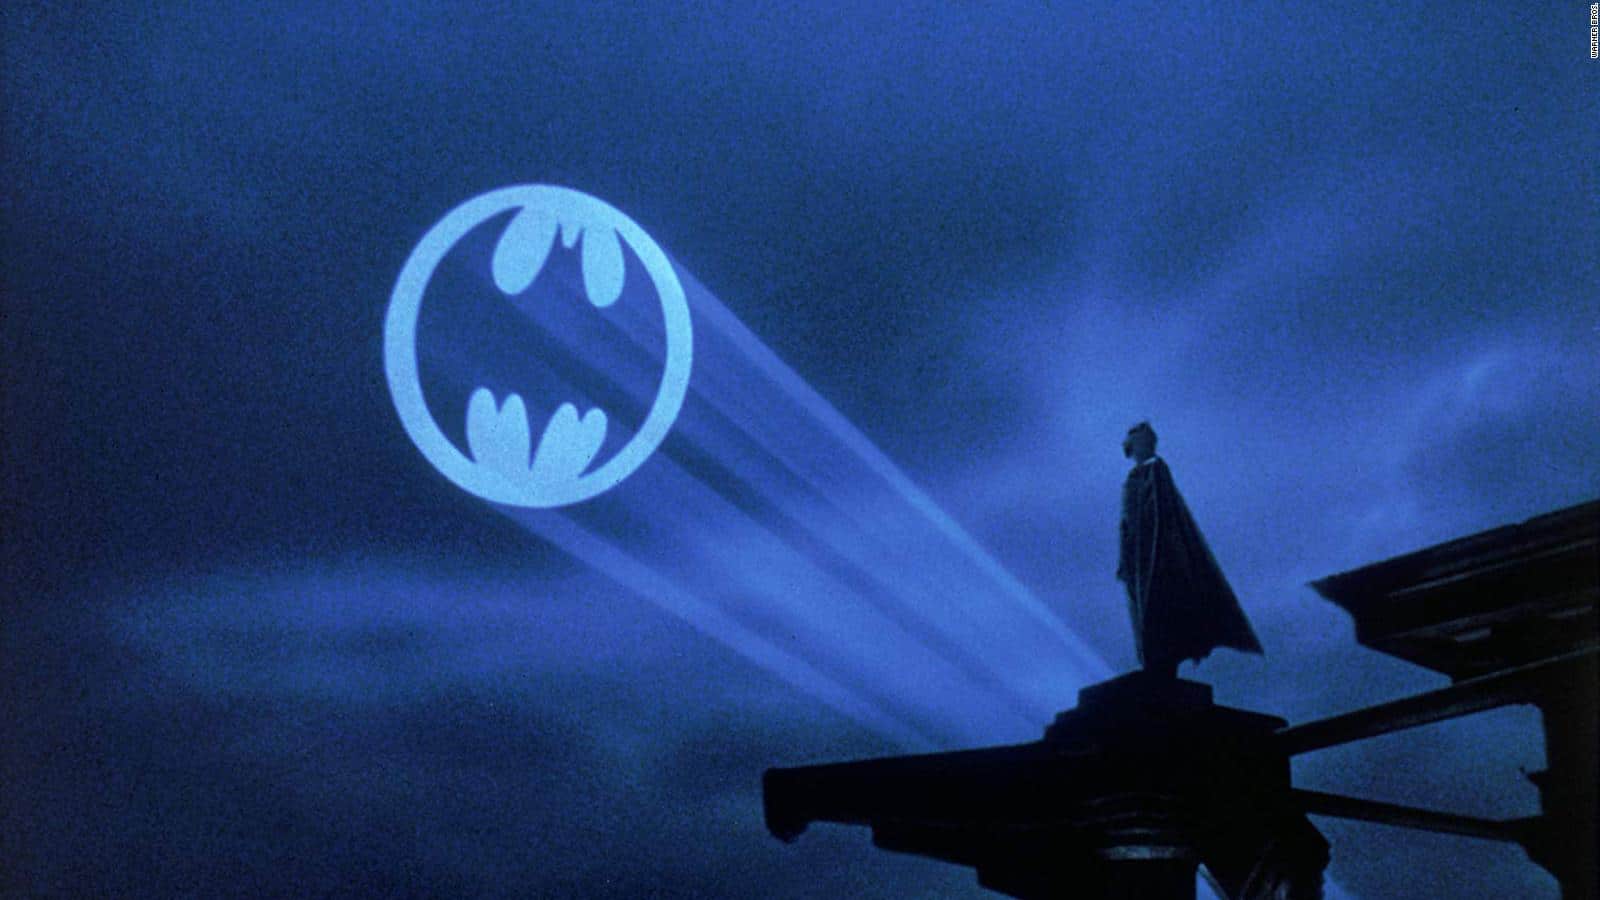 New Batman Fan Theory Summarizes Who the Bat-Signal Is Actually For